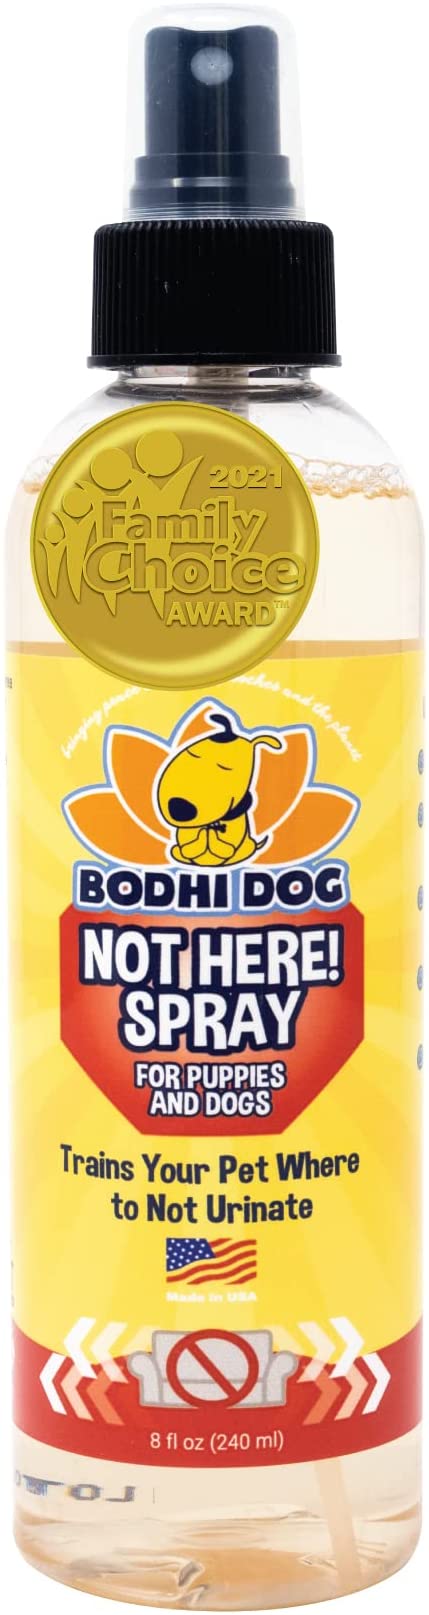 Bodhi Dog Not Here! Spray | Trains Your Pet Where Not to Urinate